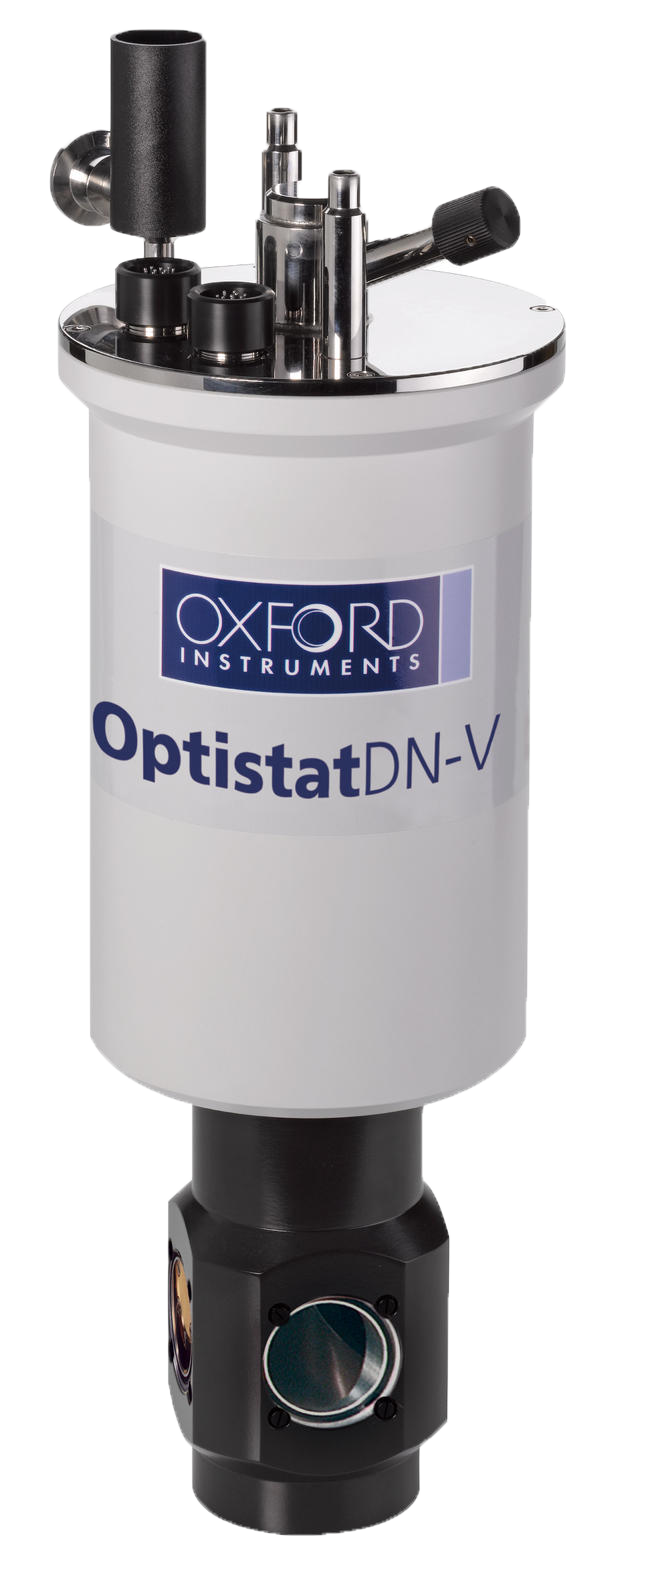 OptistatDN-V - Spectroscopy, cryostats, wet nitrogen cryostats, and sample-in-vaccuum for low temperature research and cryogenics